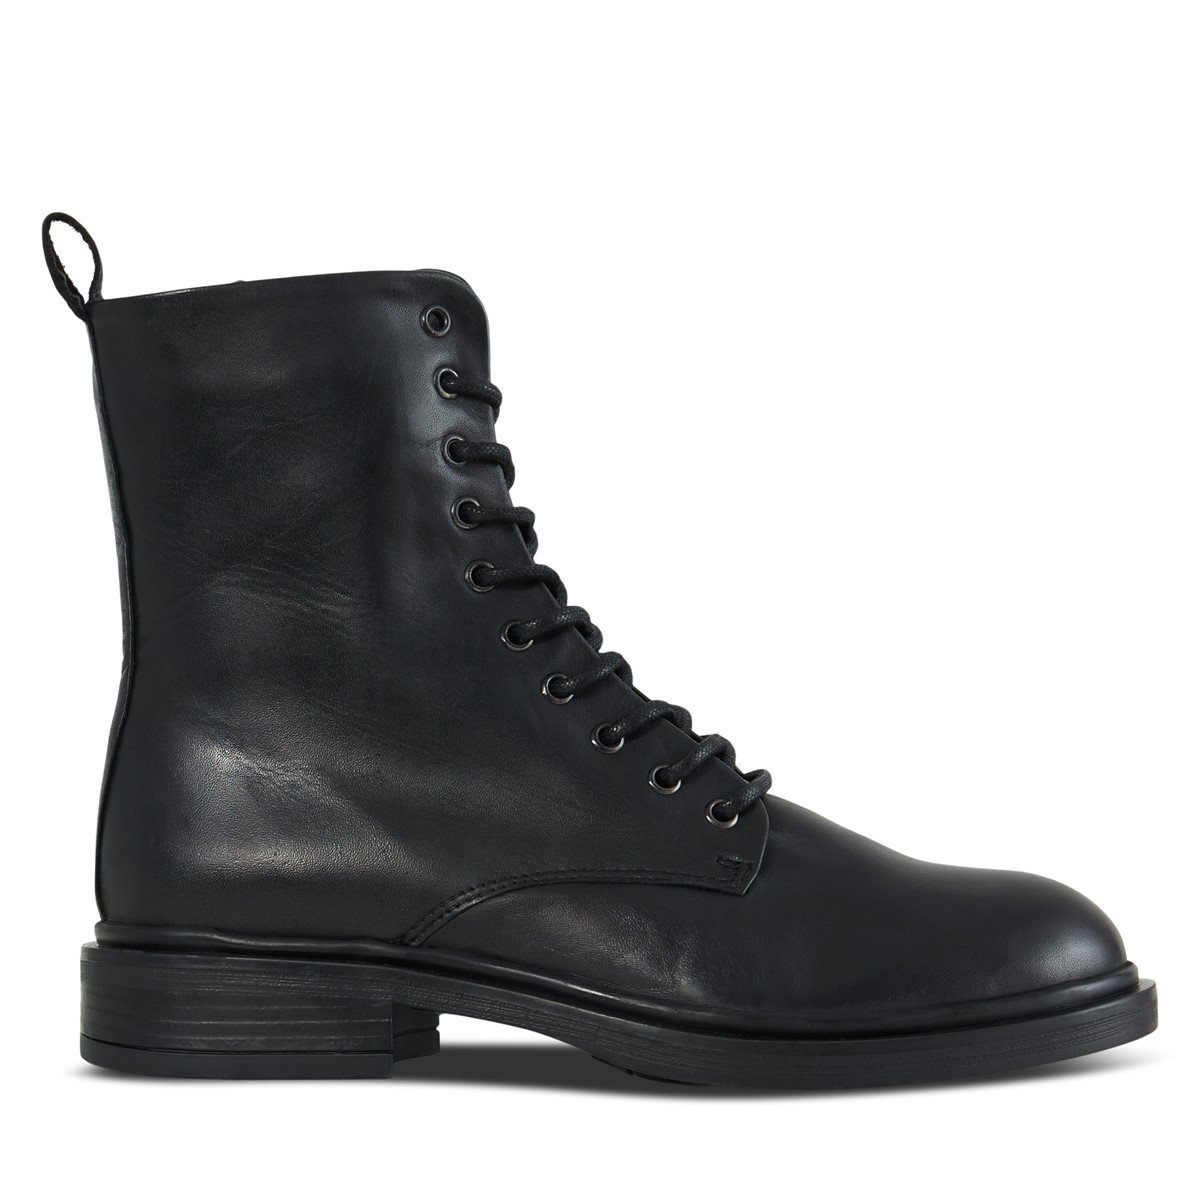 Women's Lena Lace-Up Boots in Black